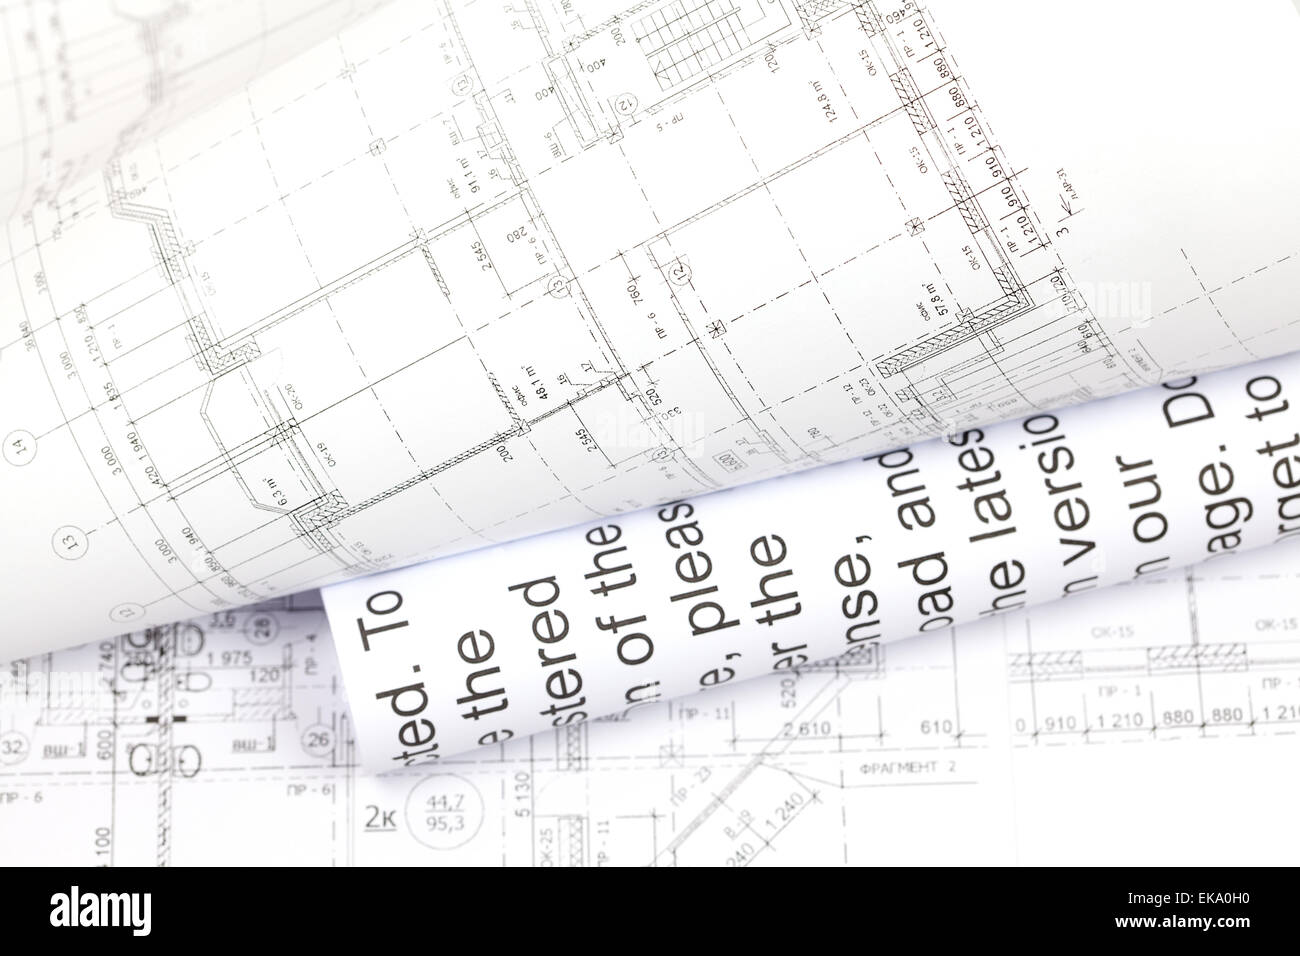 background of architectural drawing Stock Photo